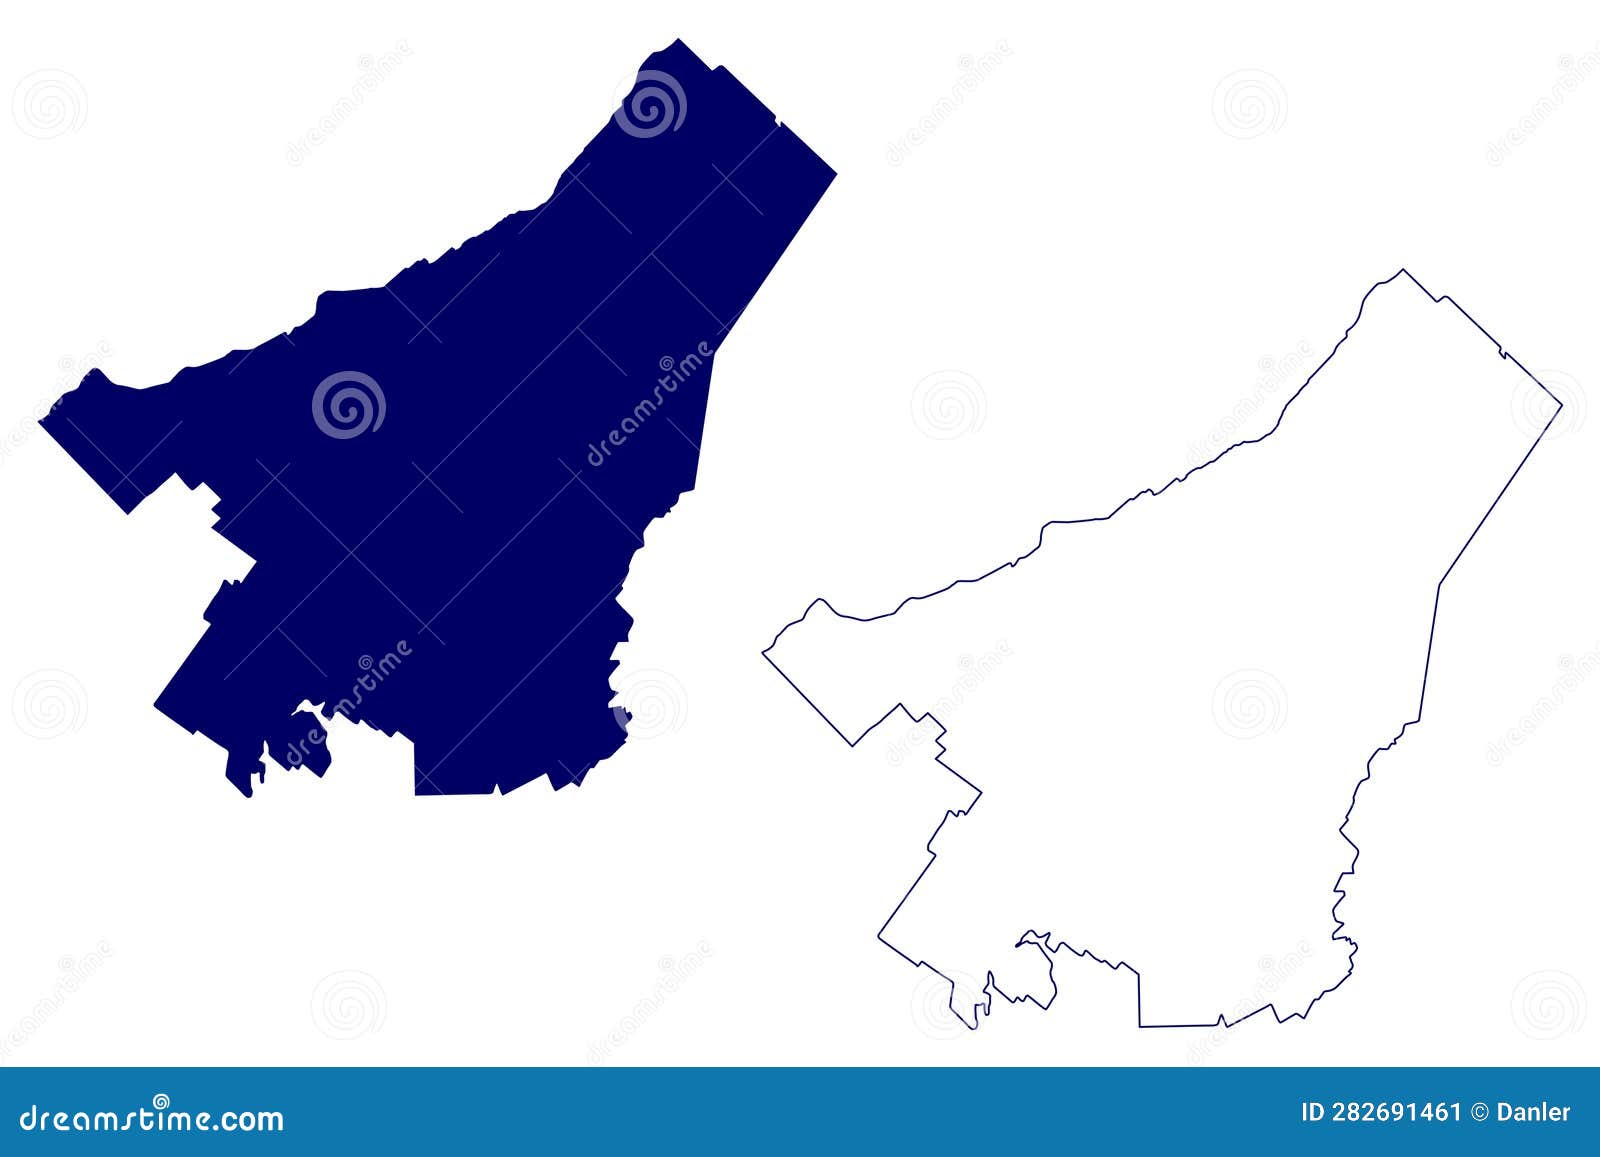 chaudiere-appalaches administrative region (canada, quebec province, north america)